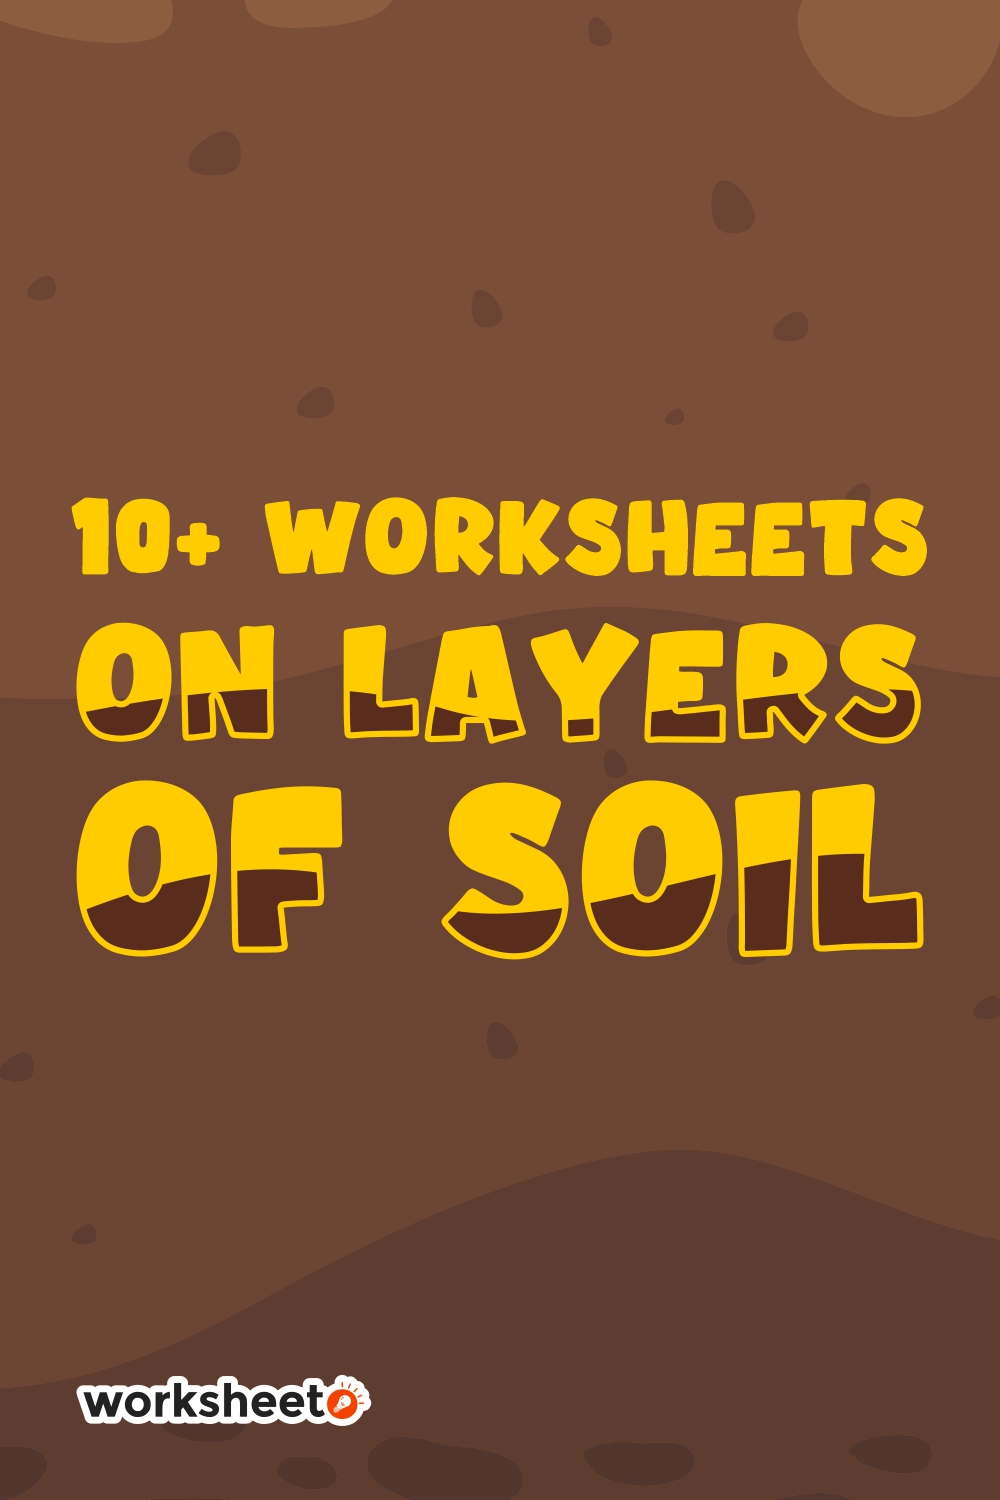 Worksheets On Layers of Soil